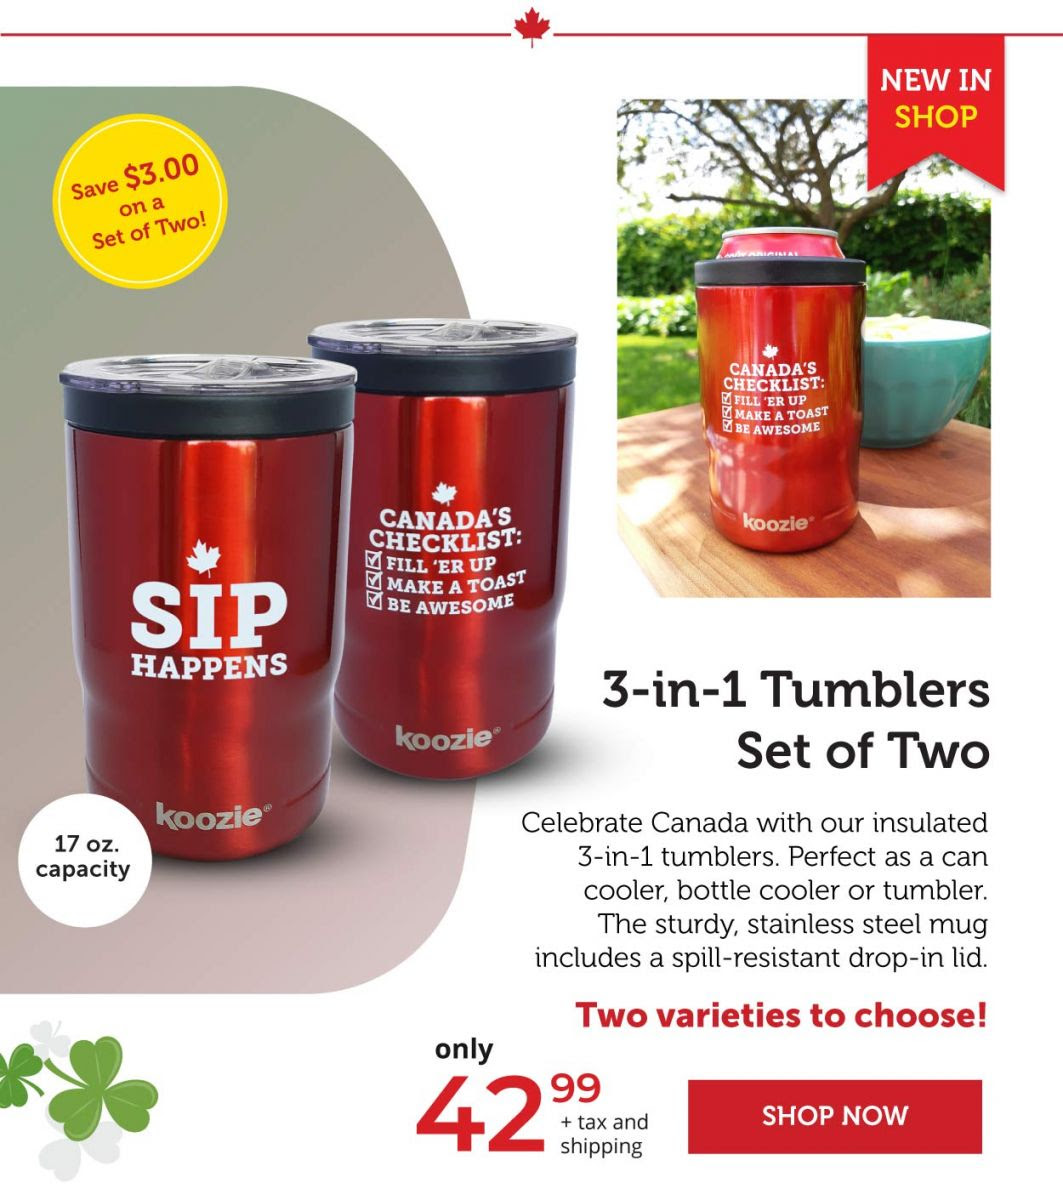 3-in-1 Tumbler set of two